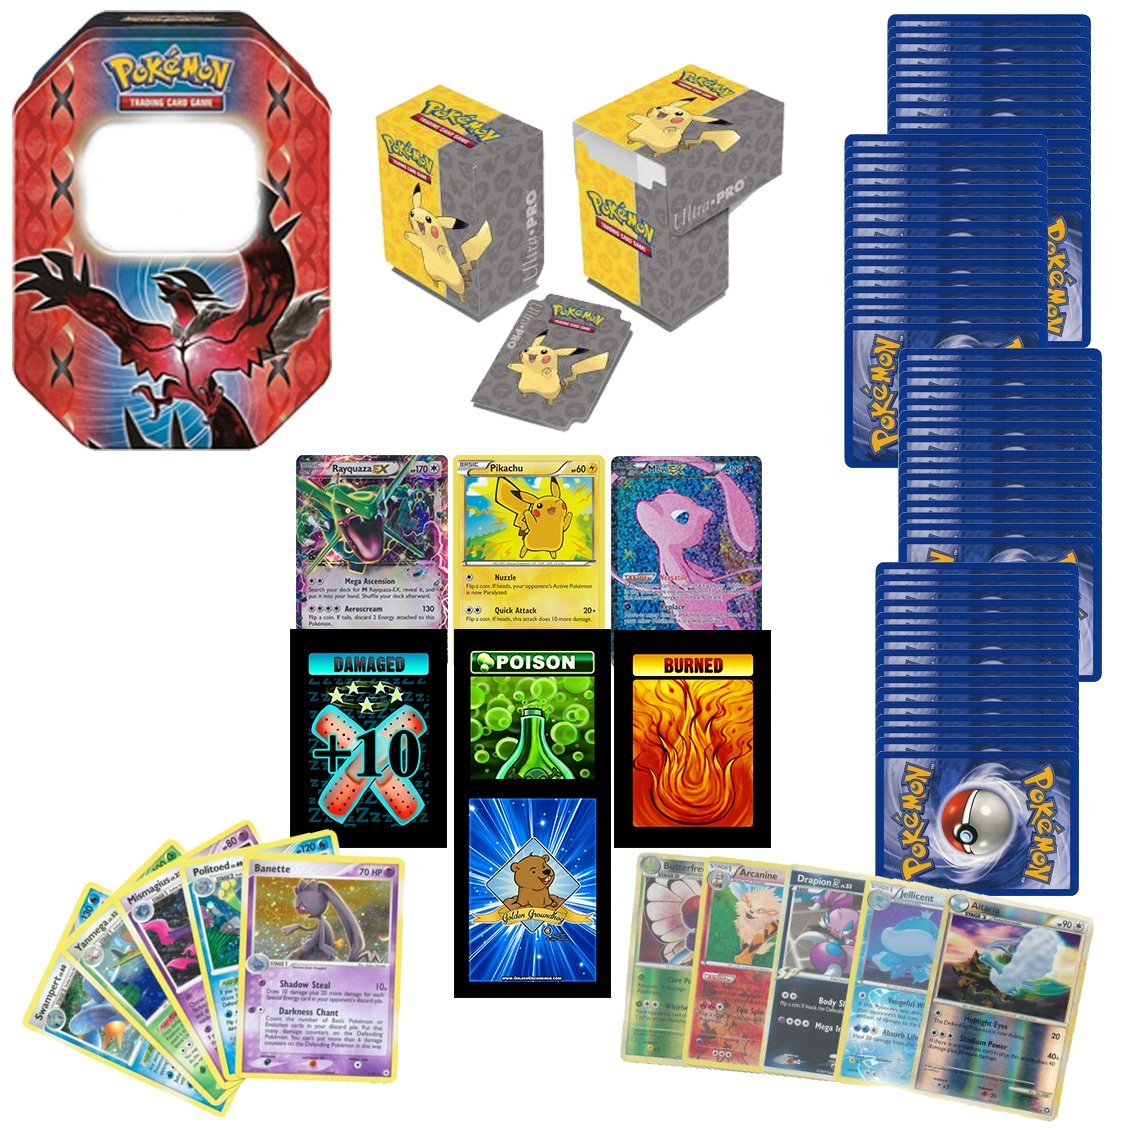 Pokemon Fun! Pokemon Card & Accessories Review | Party of Four (Room ...